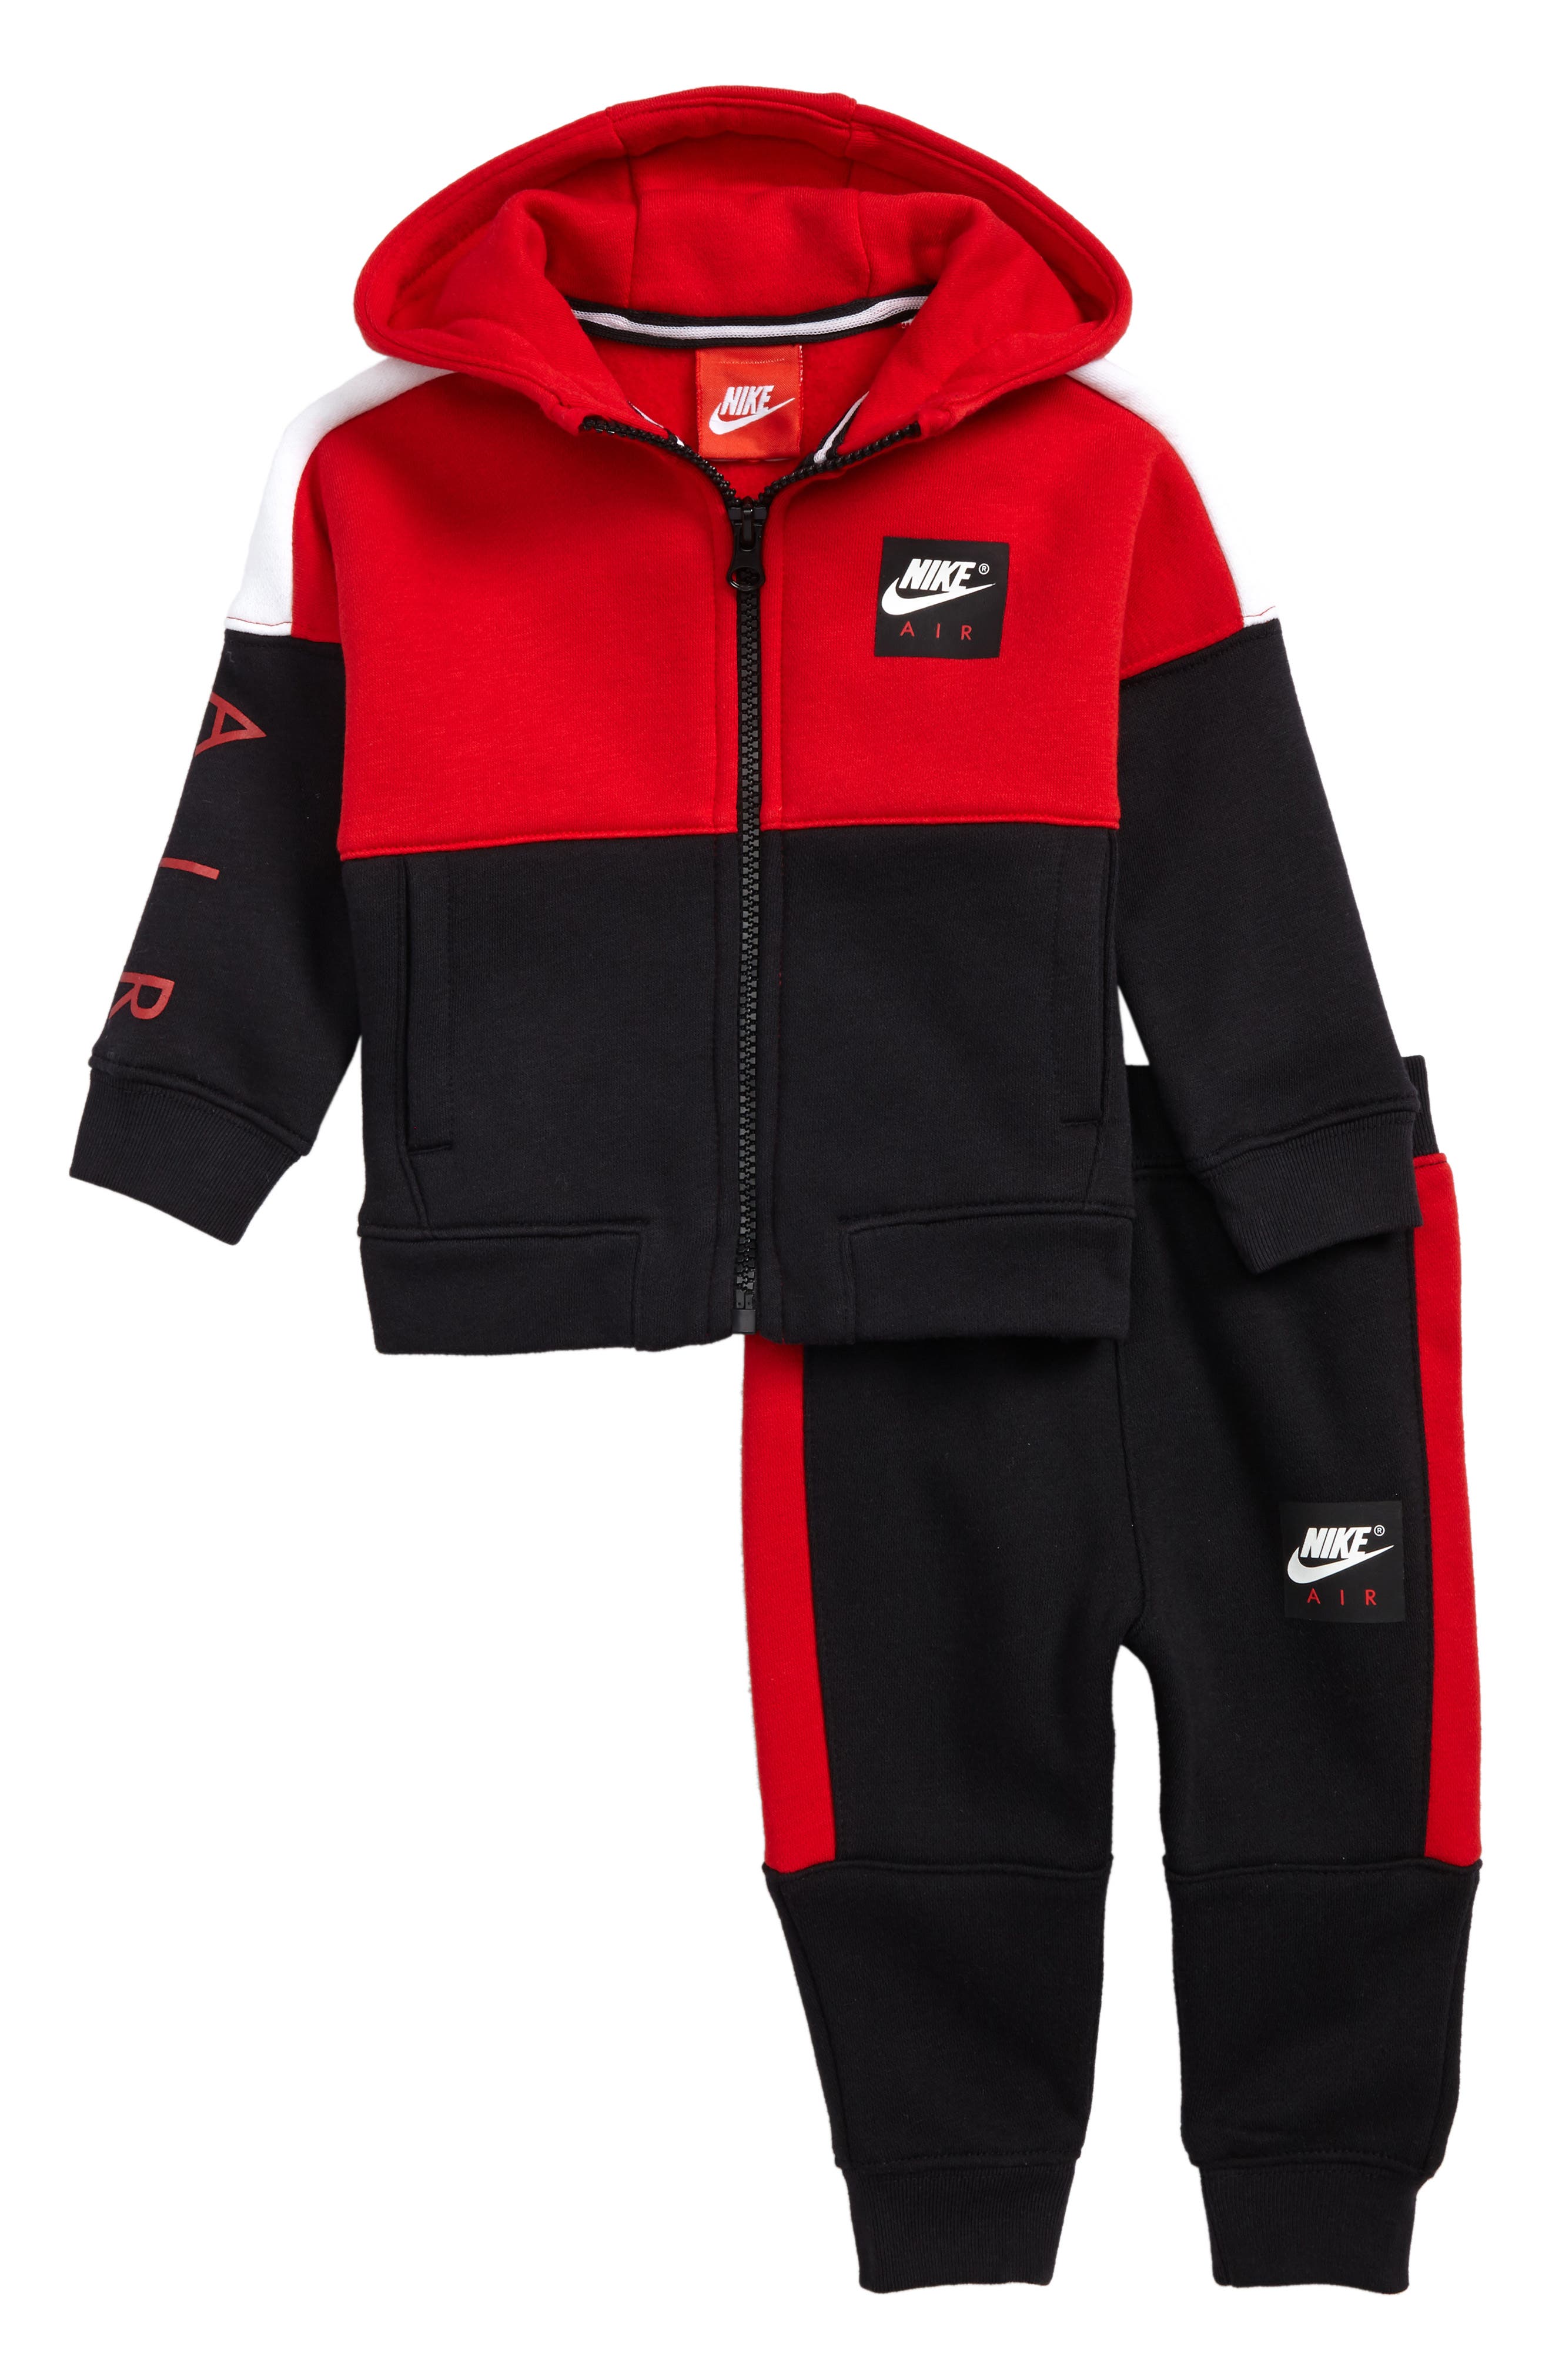 nike jogging suits for sale